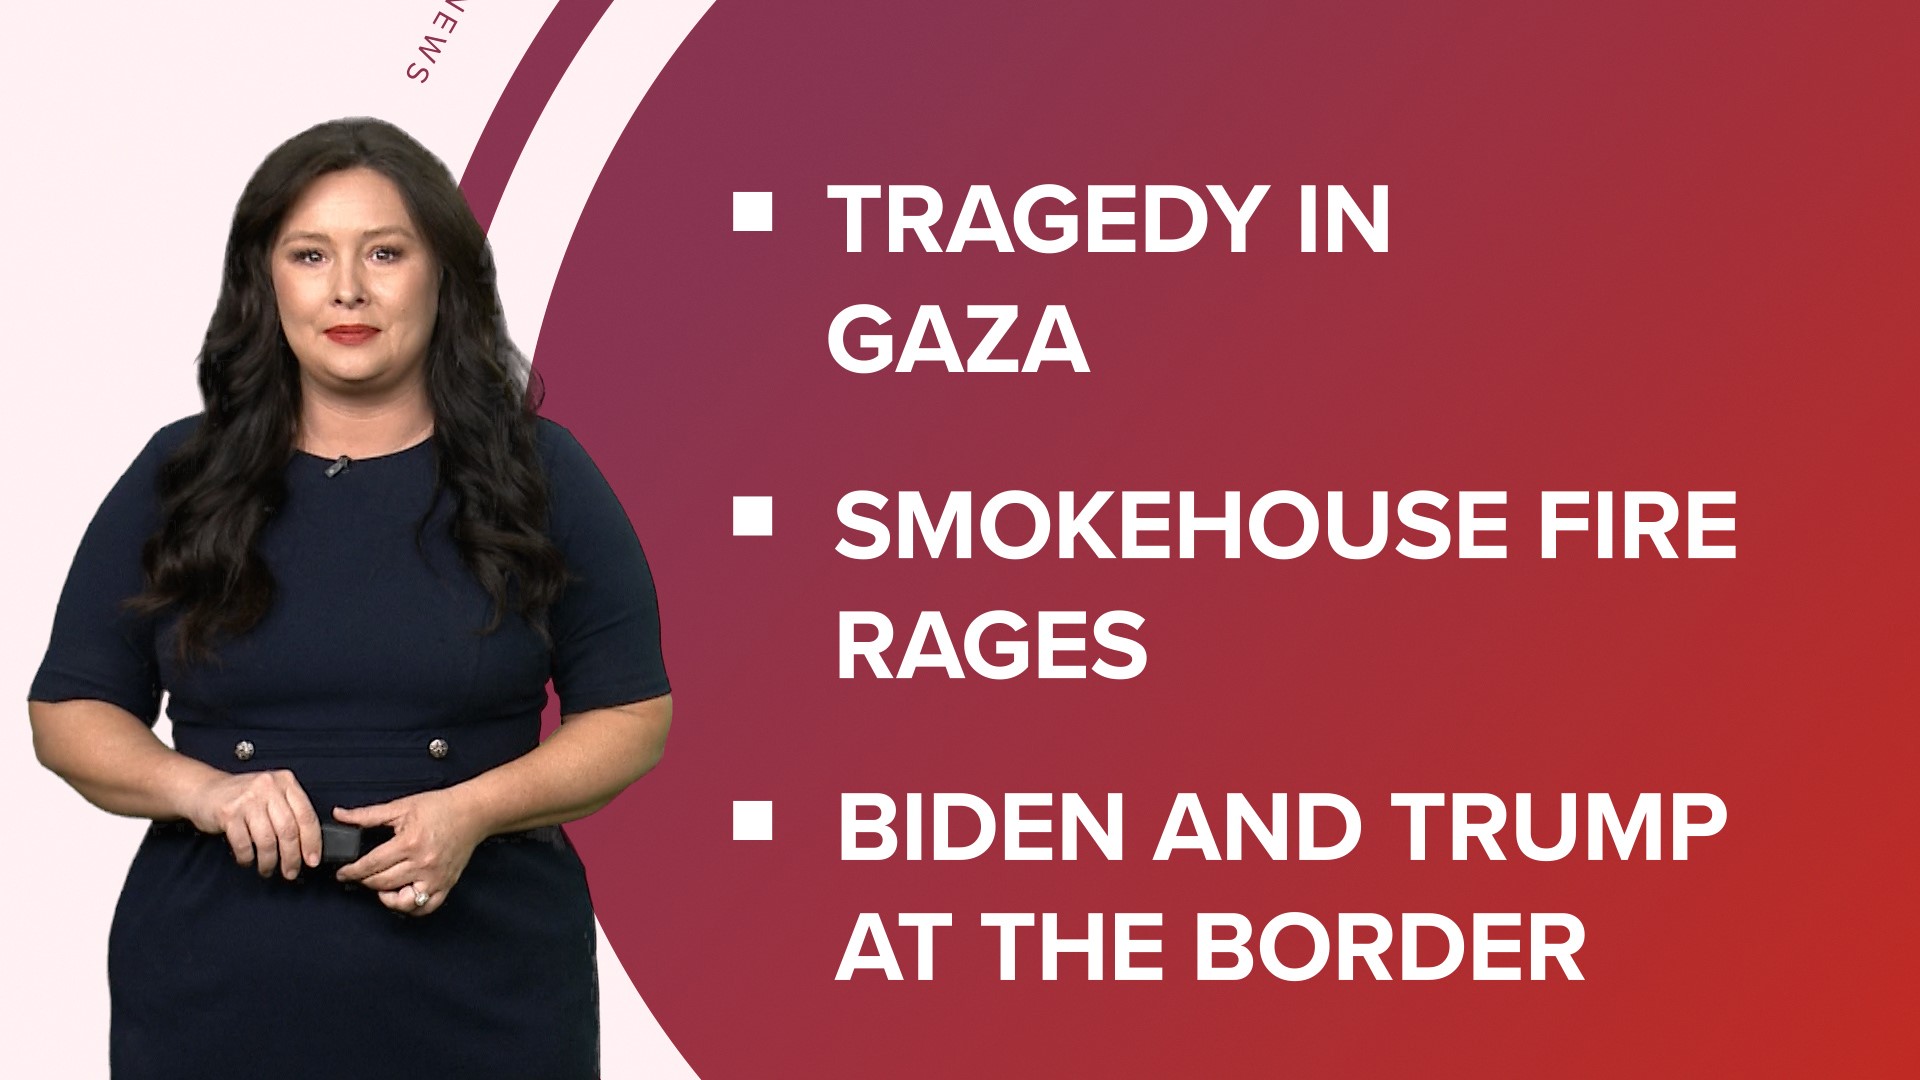 A look at what is happening in the news from Pres. Biden and Trump visit the U.S.-Mexico border to death toll in Gaza increases and wildfire in Texas update.